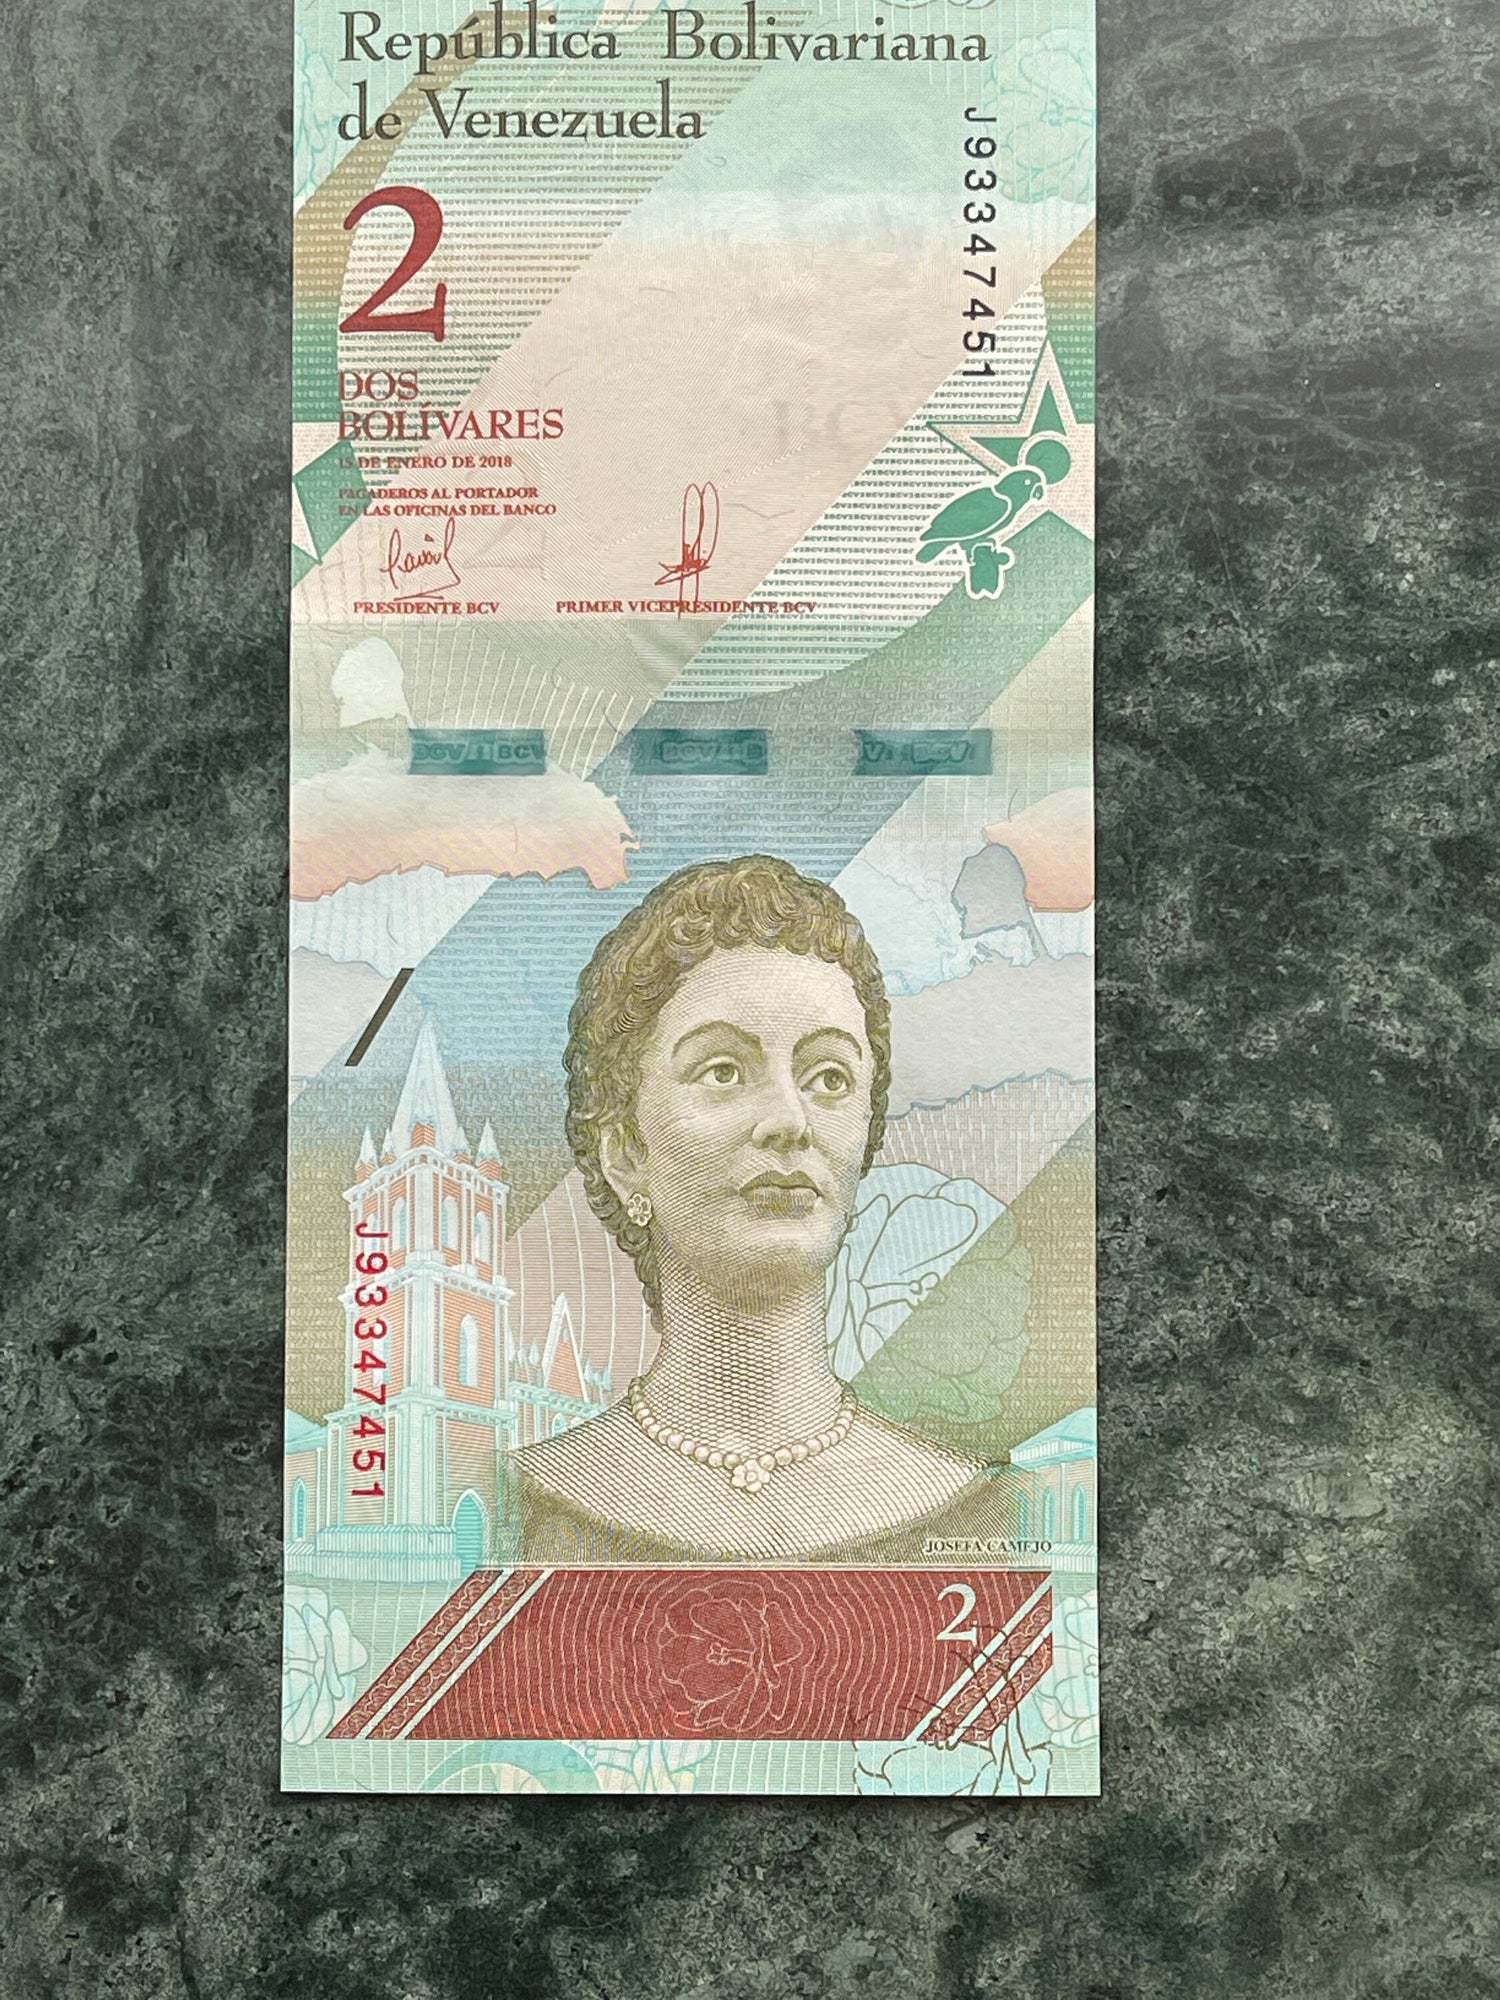 Doña Ignacia Josefa Camejo & Yellow-Crowned Parrot 2 Bolívares Venezuela Authentic Banknote Money for Collage (Revolutionary) (Lady Ardent)